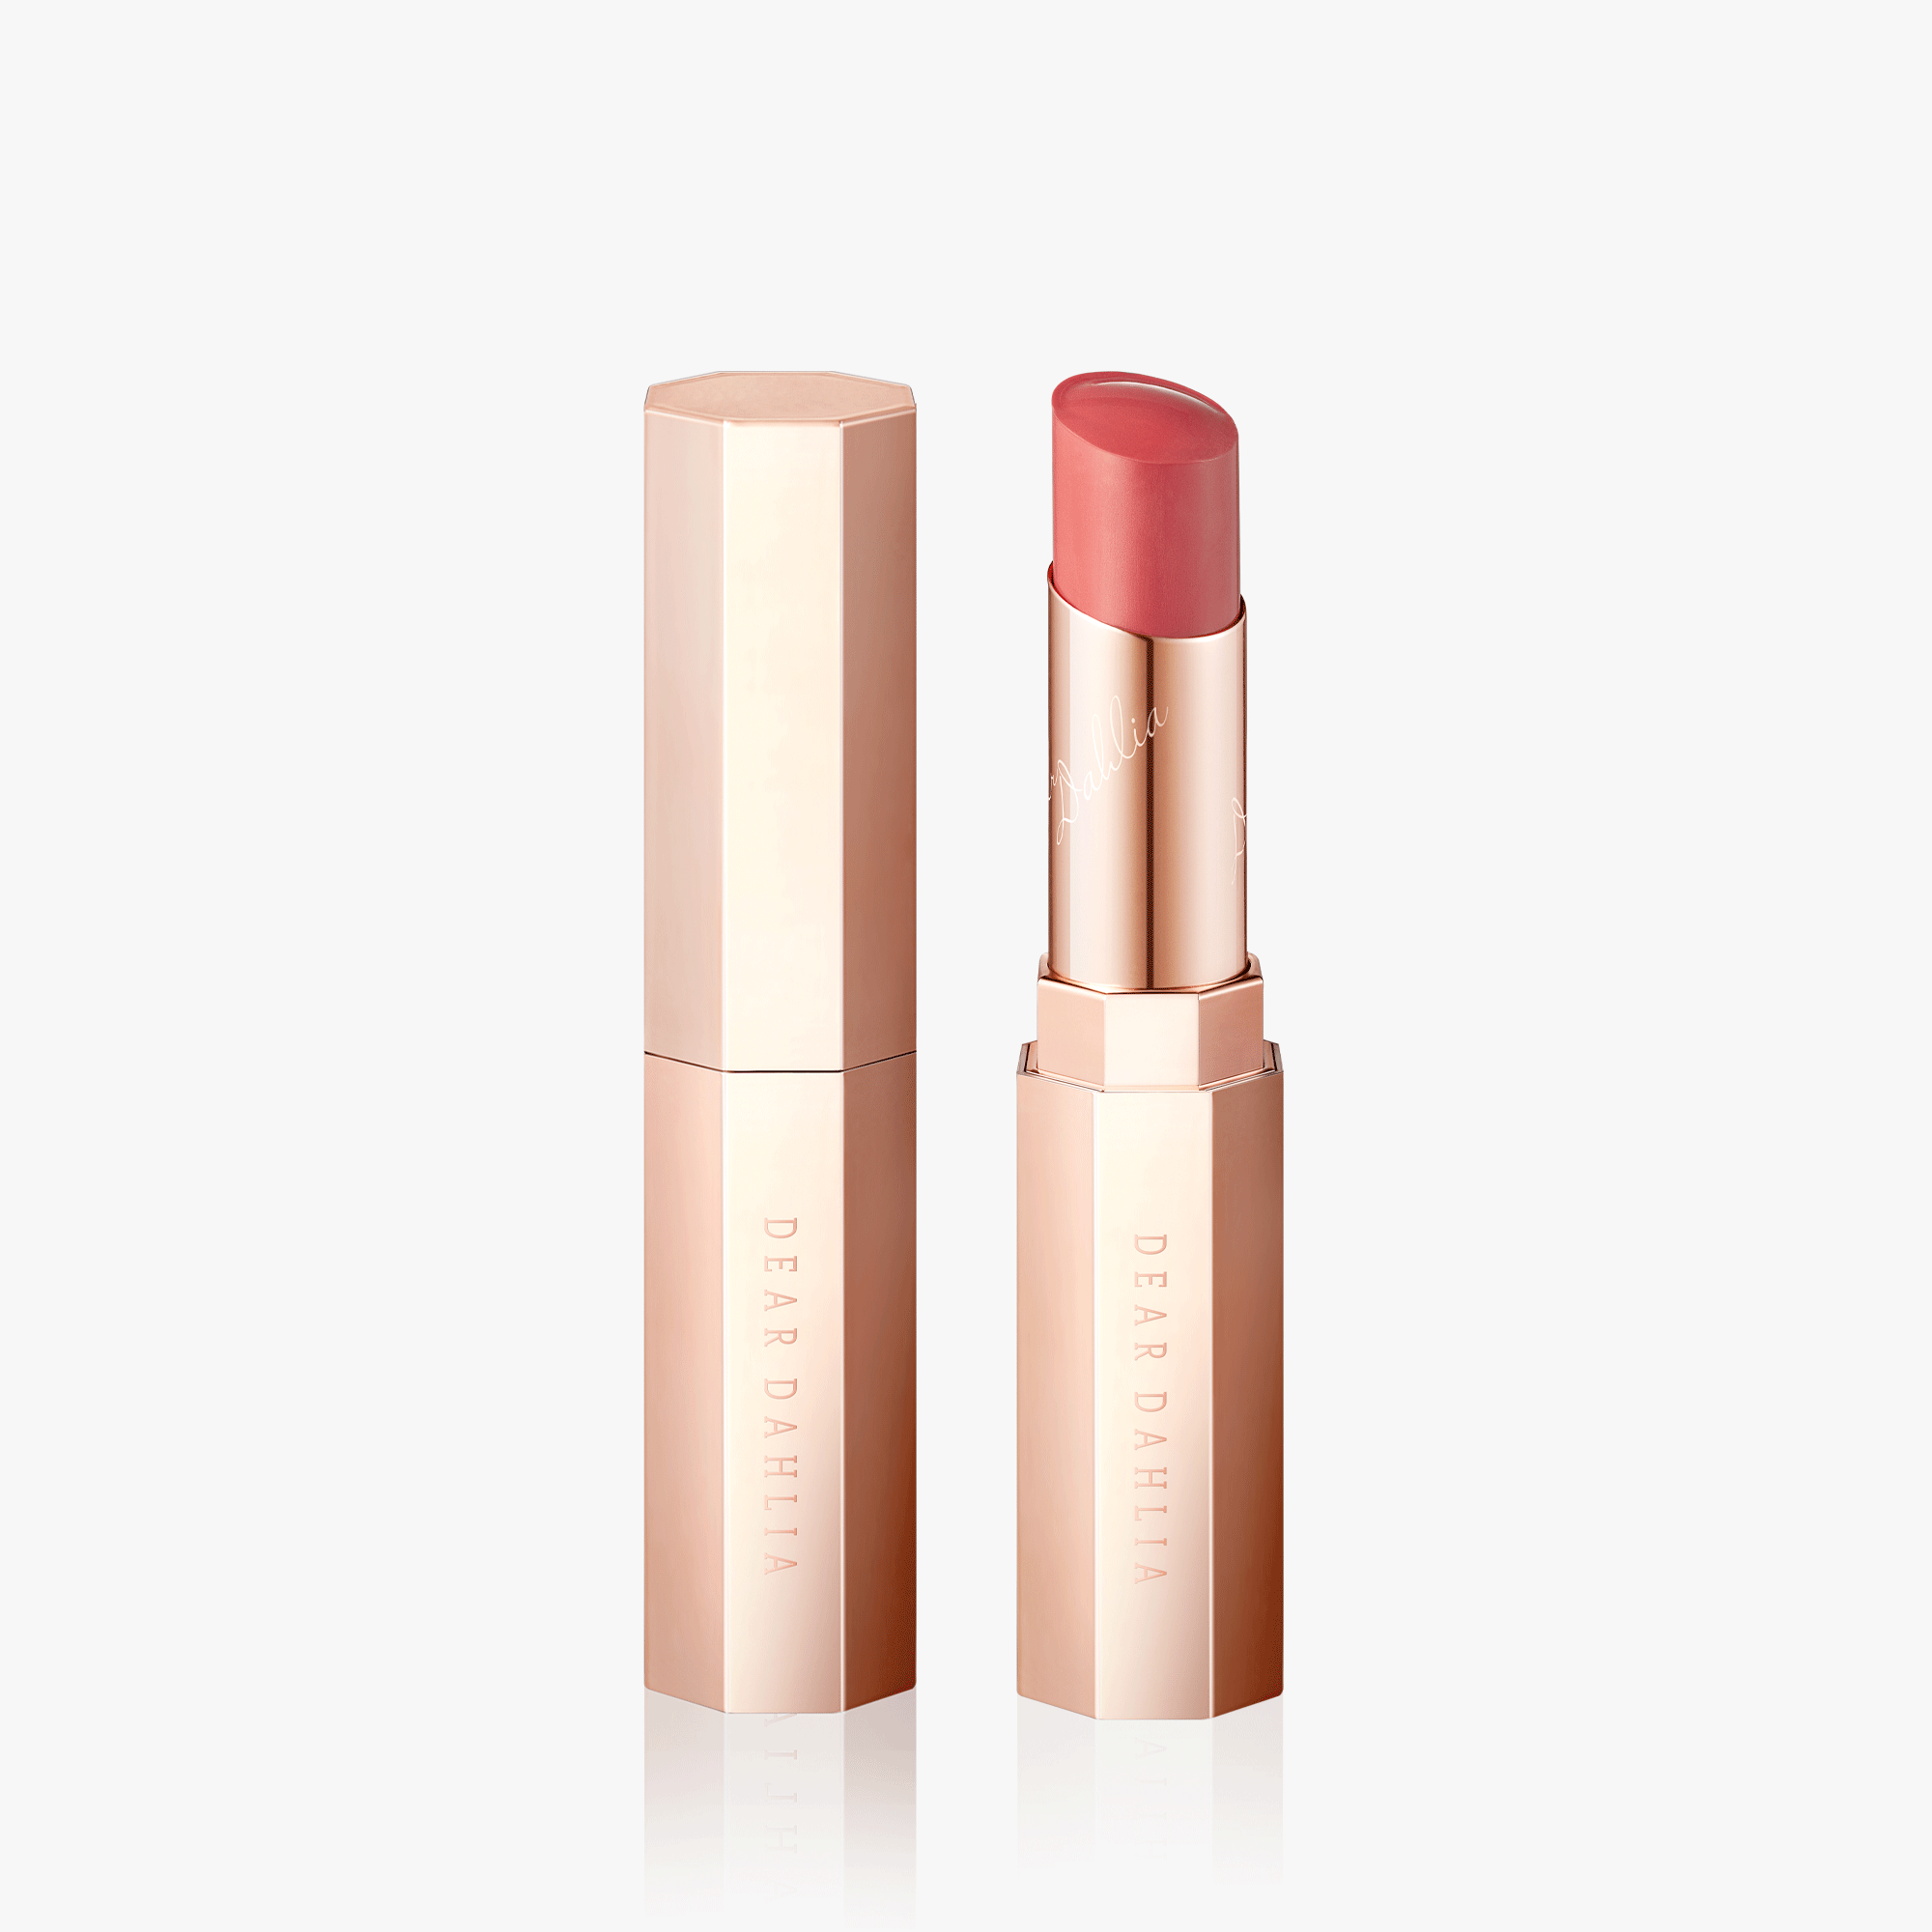 Blooming Edition Lip Paradise Color Balm